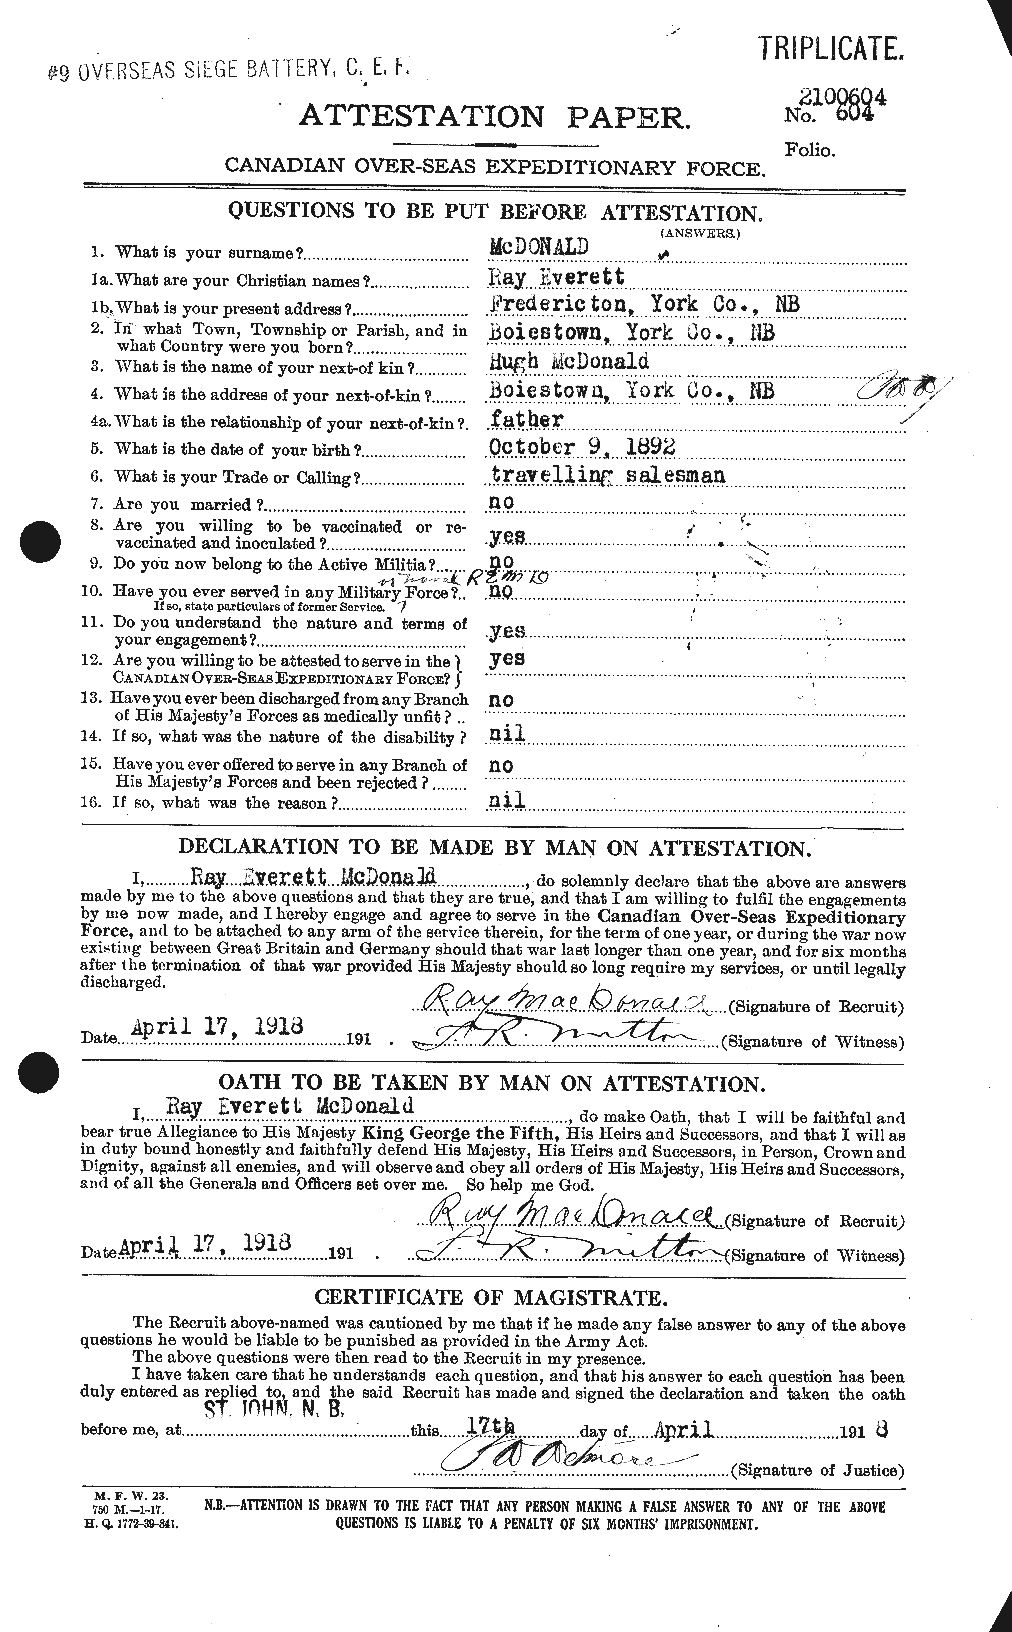 Personnel Records of the First World War - CEF 524813a